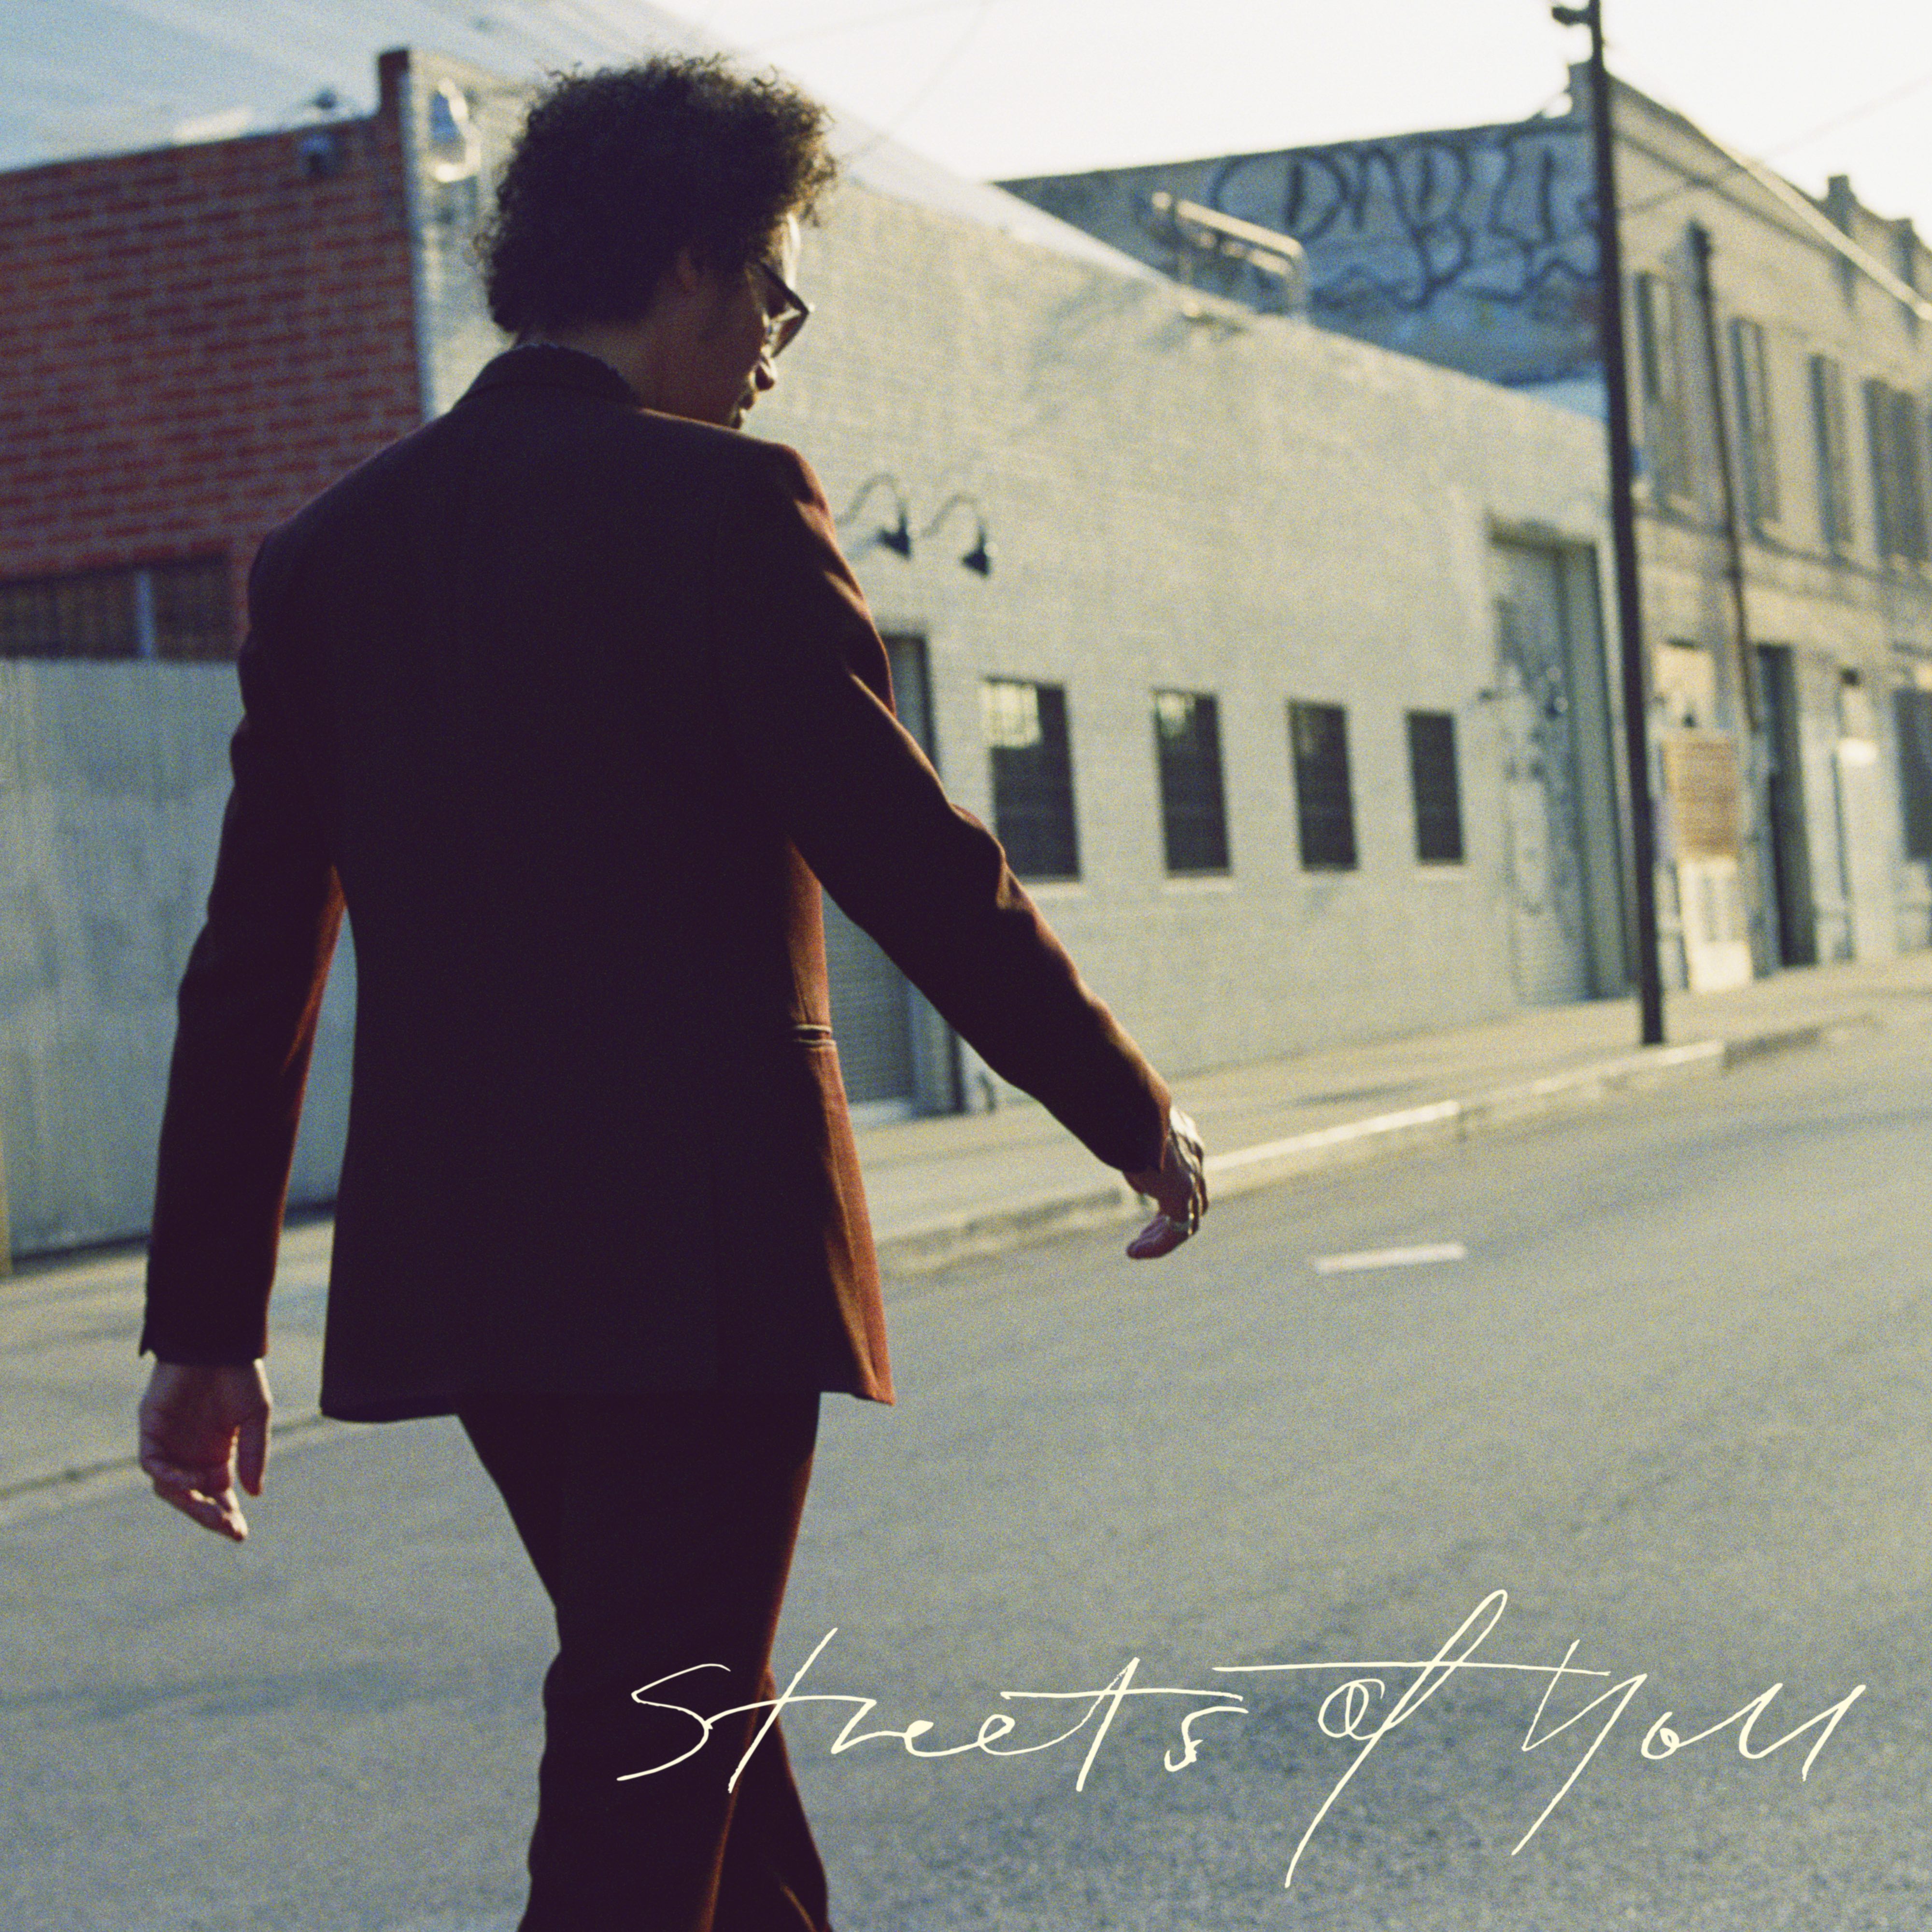 STREETS_OF YOU_4000x4000